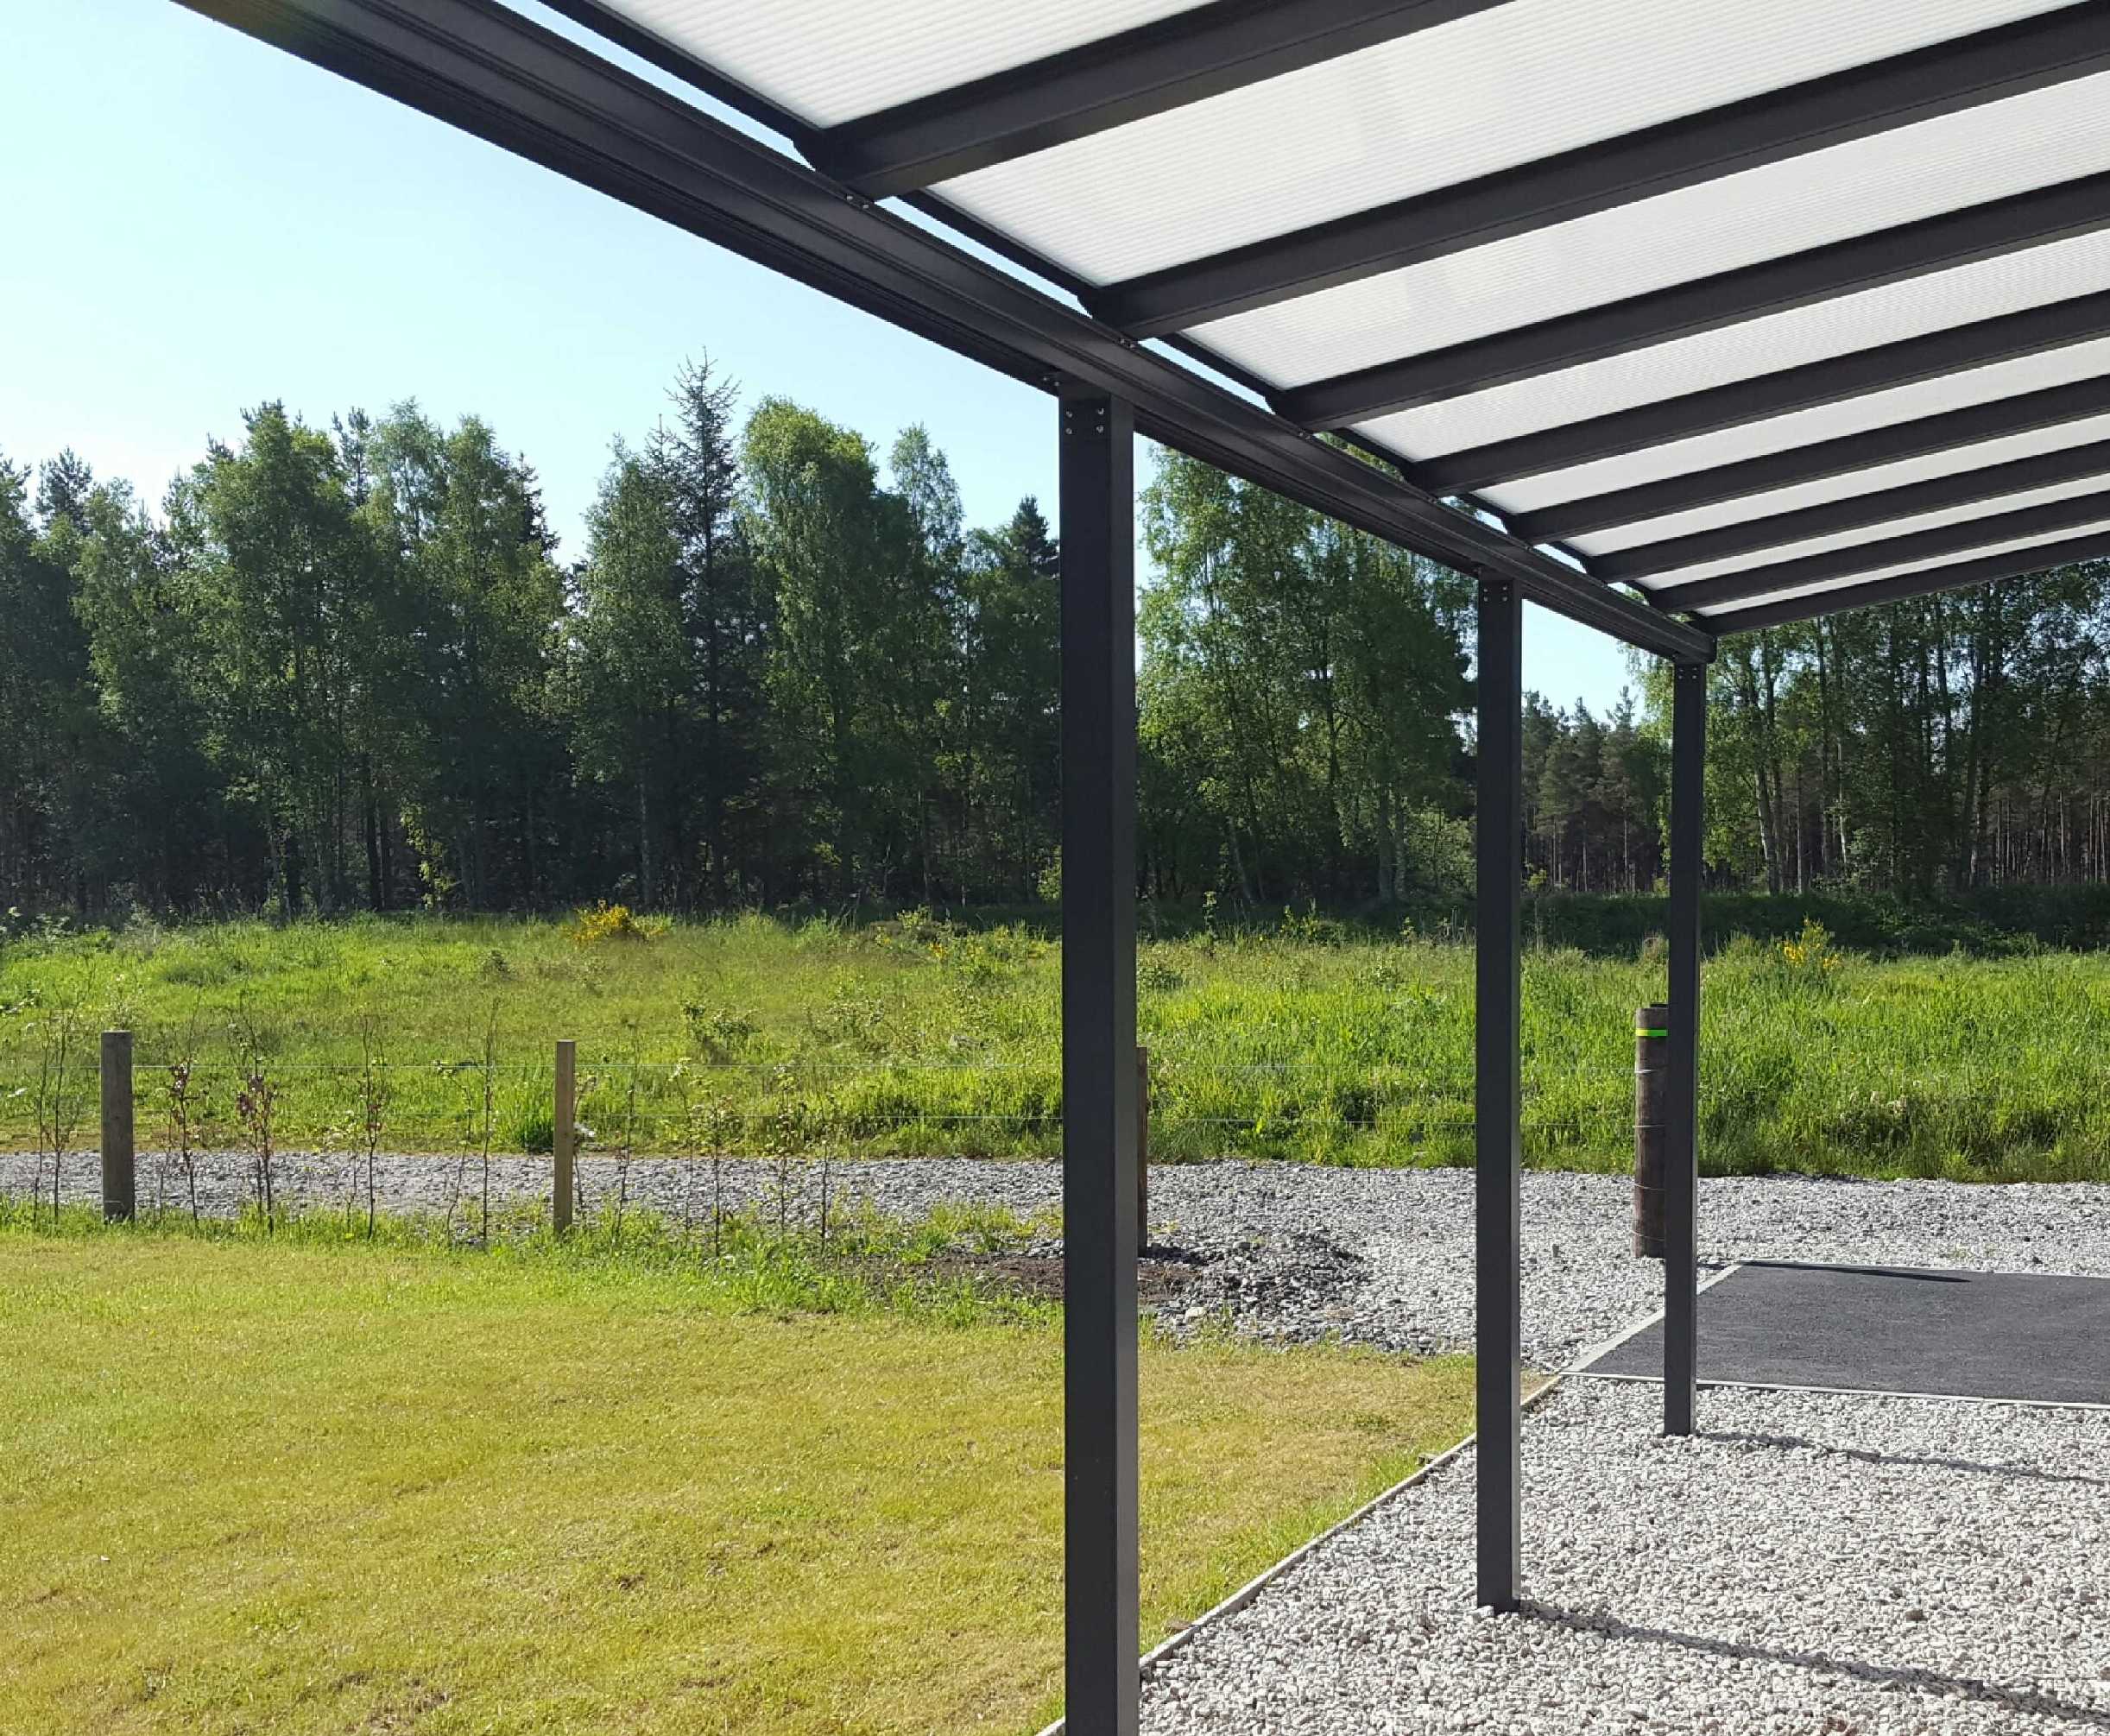 Omega Smart Lean-To Canopy, Anthracite Grey, 16mm Polycarbonate Glazing - 5.9m (W) x 4.5m (P), (3) Supporting Posts